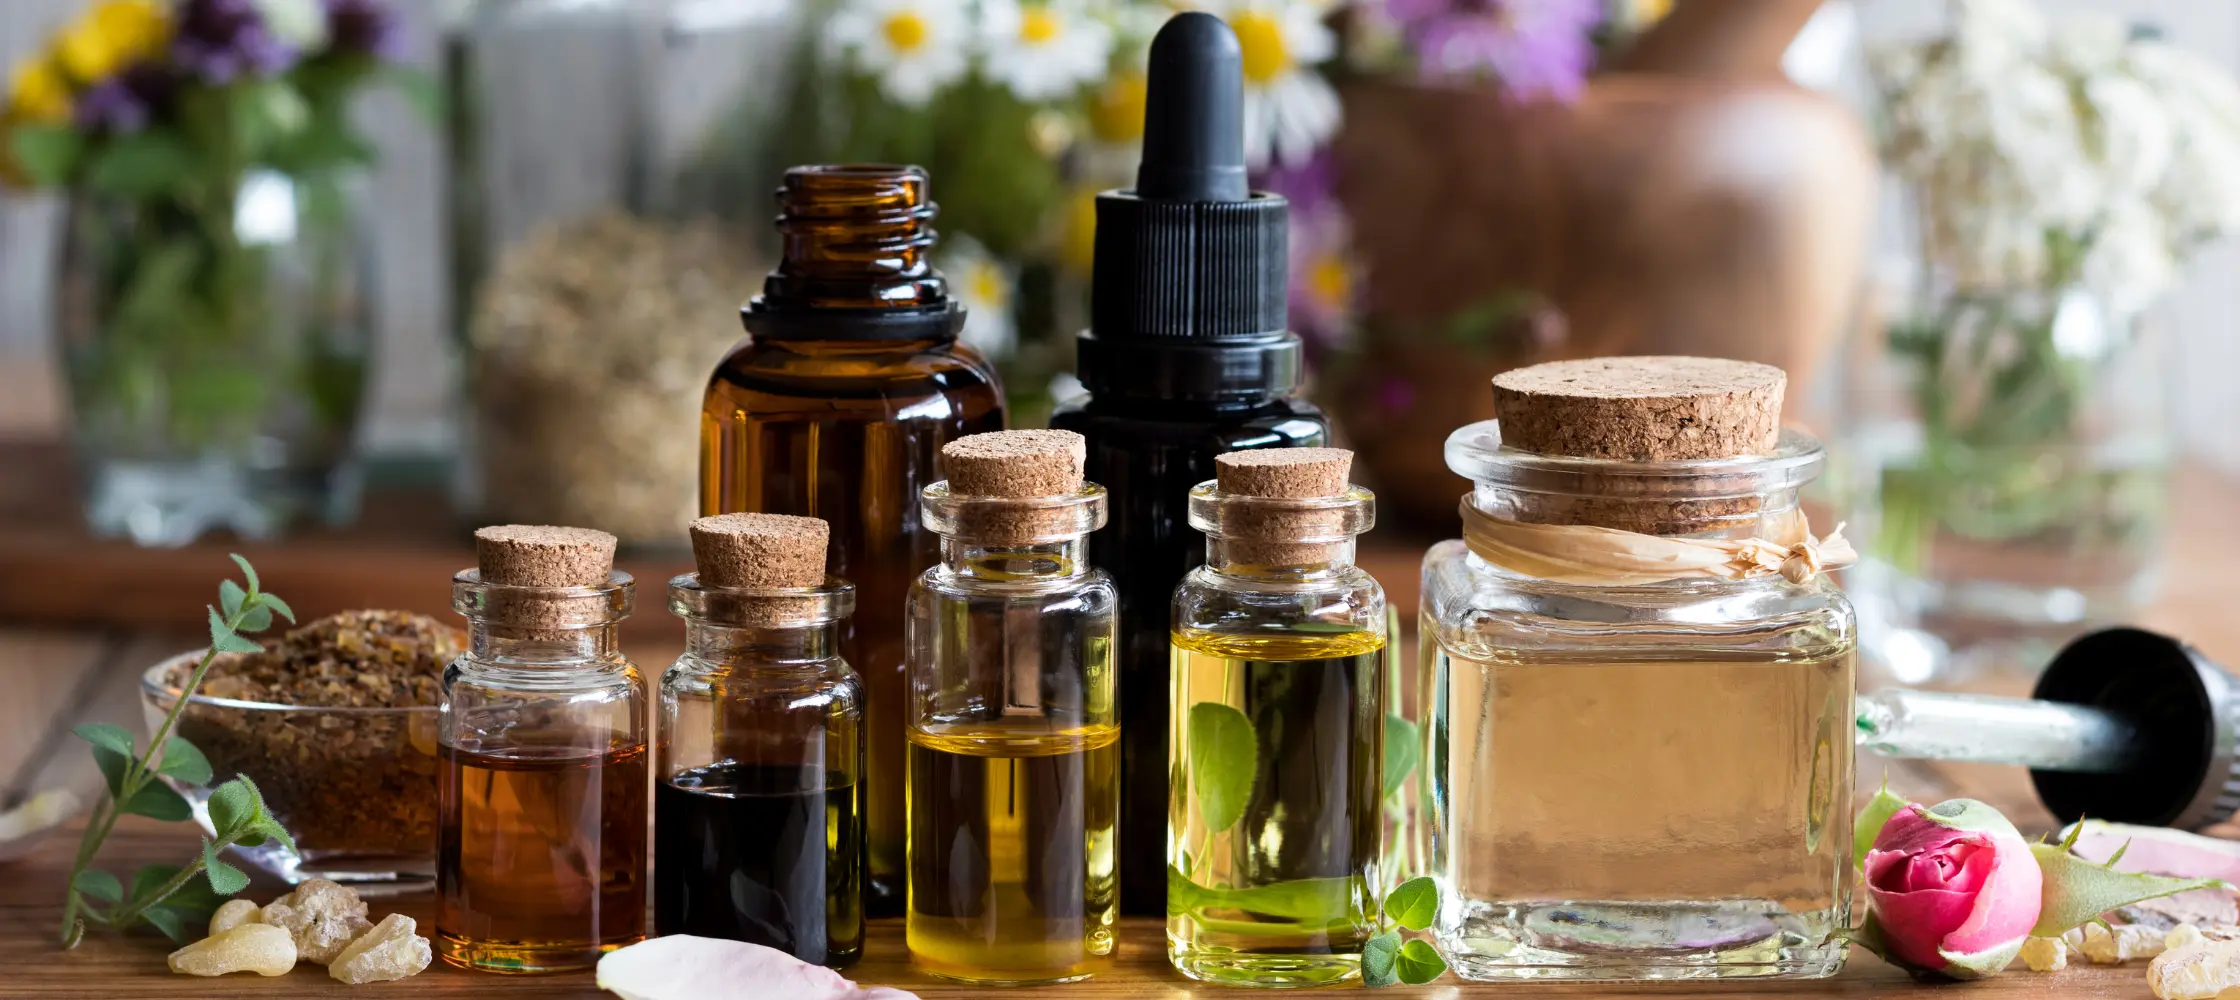 Aromatherapy: Potent Benefits and Controversies of Ingesting Essential Oils